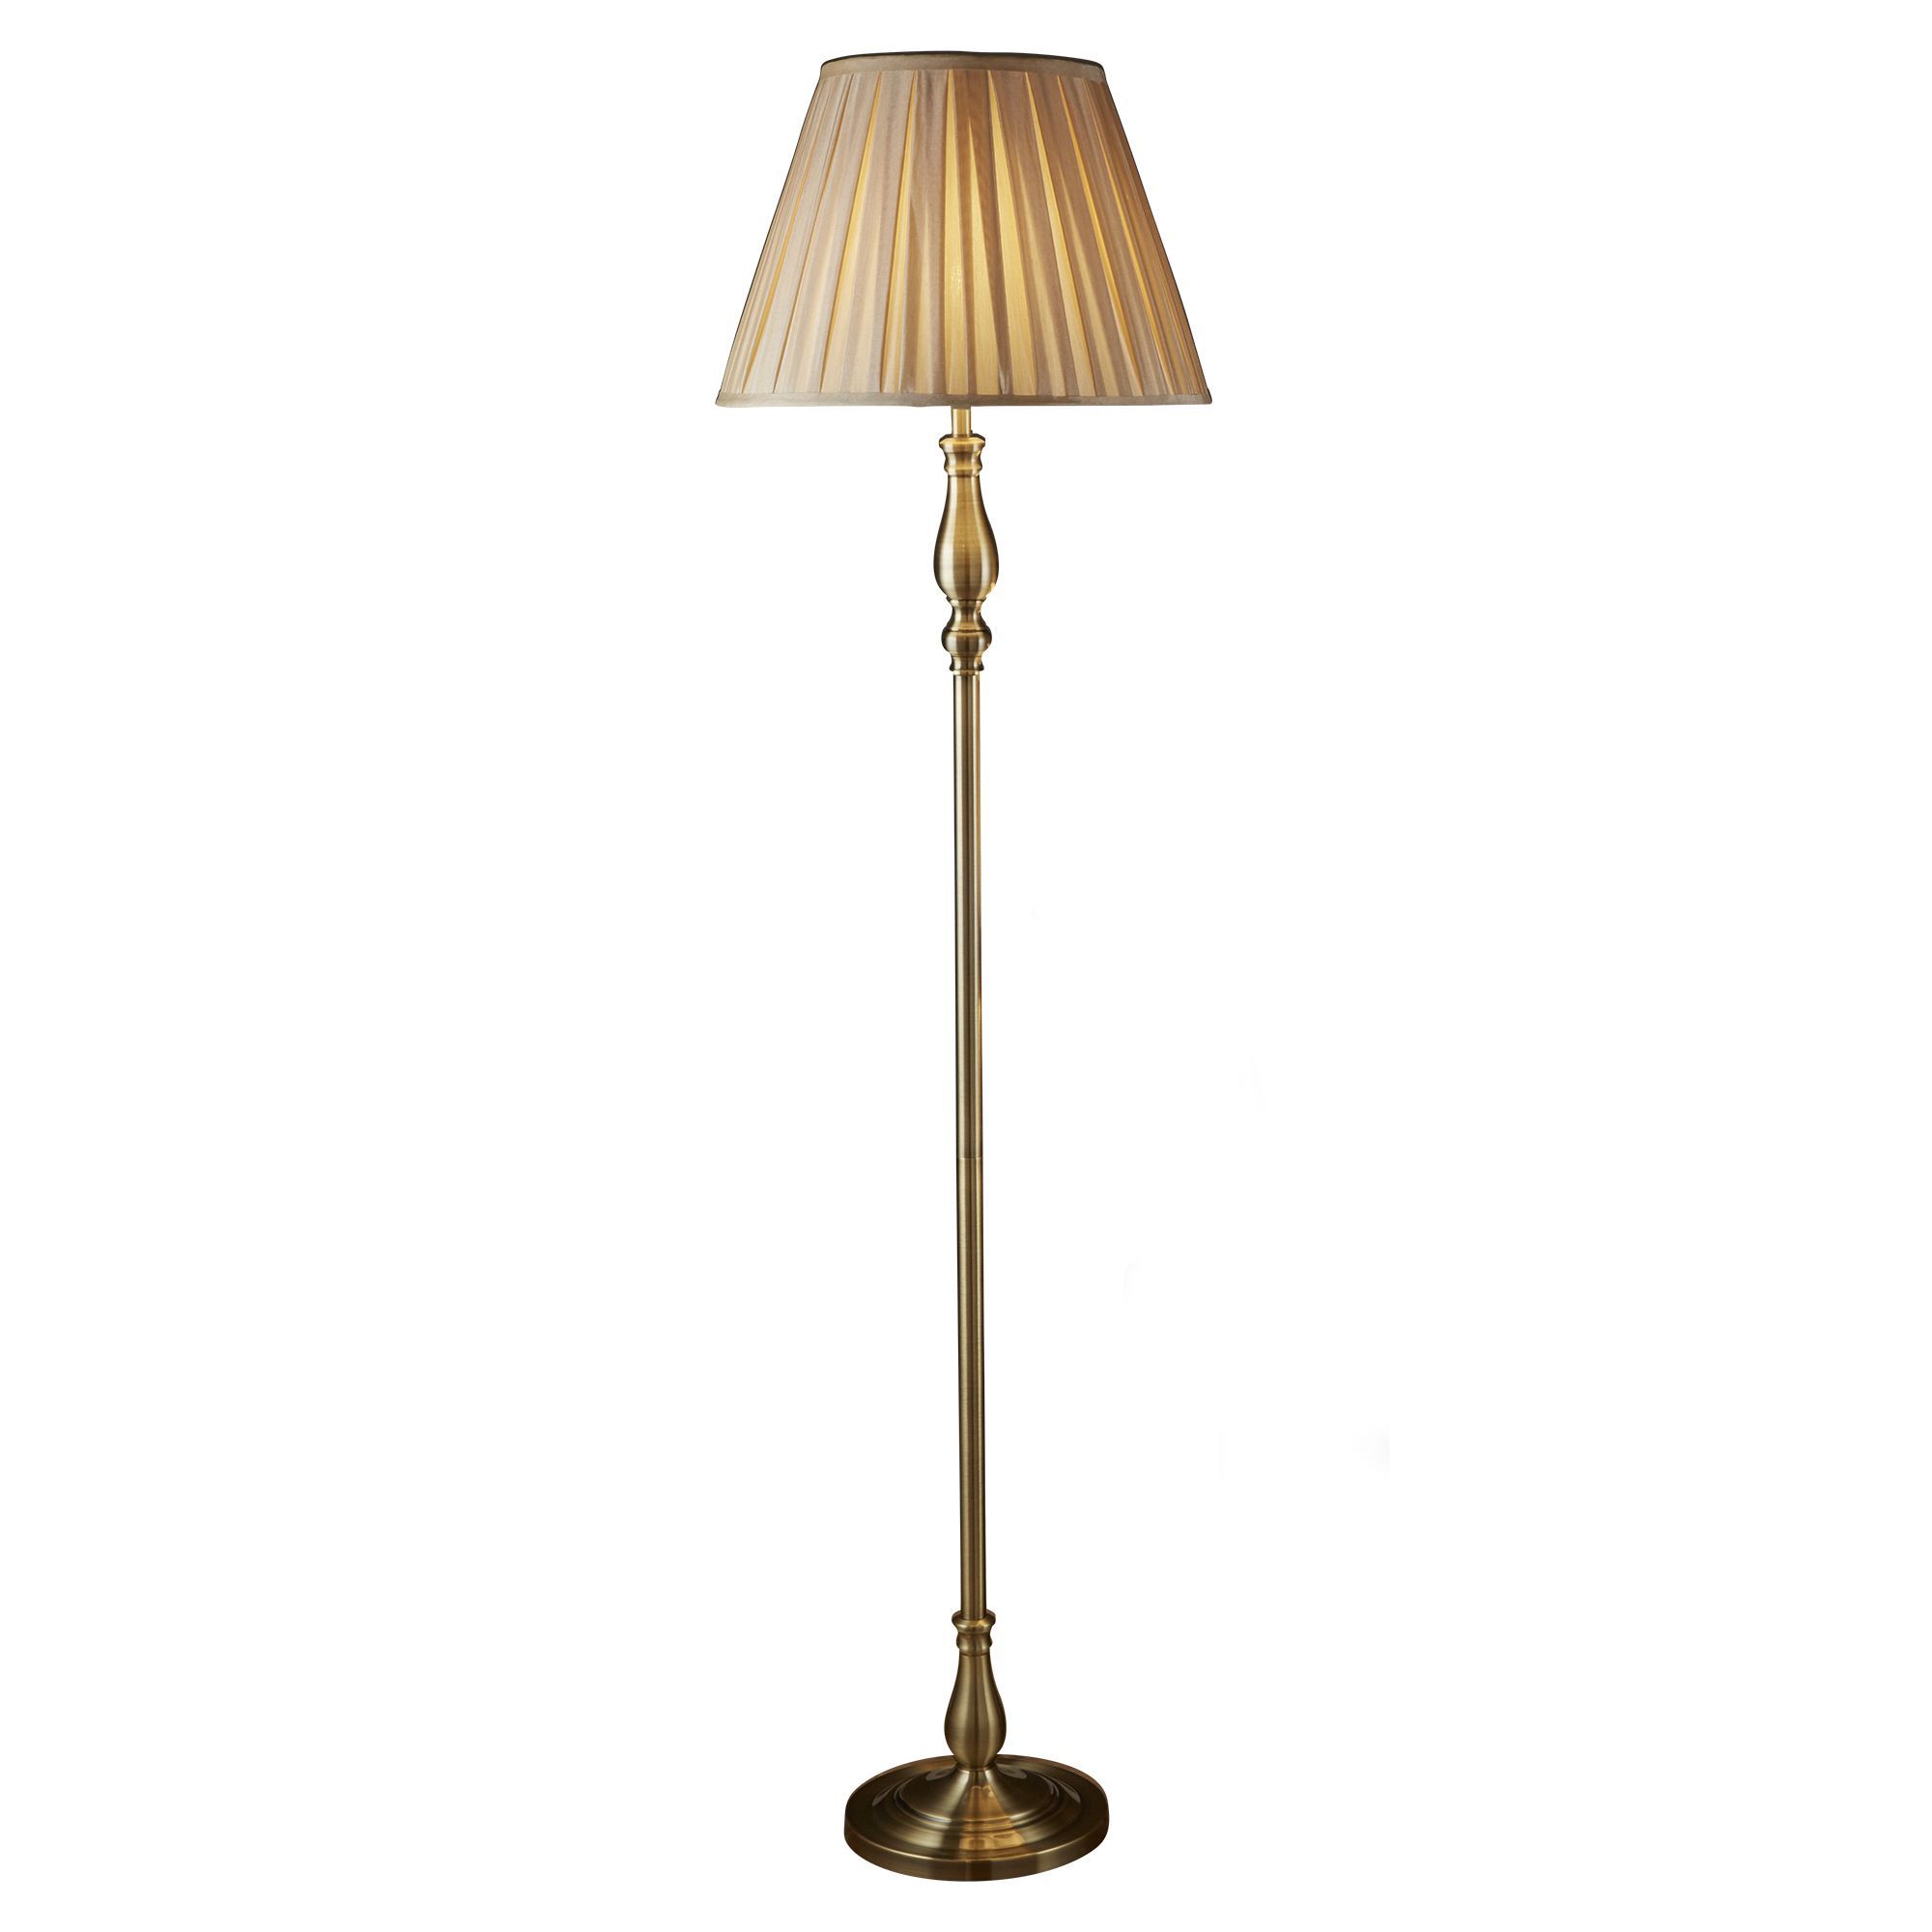 Antique Brass Floor Lamp With Pleated Fabric Shade | 5029ab Throughout Antique Brass Floor Lamps (View 14 of 15)